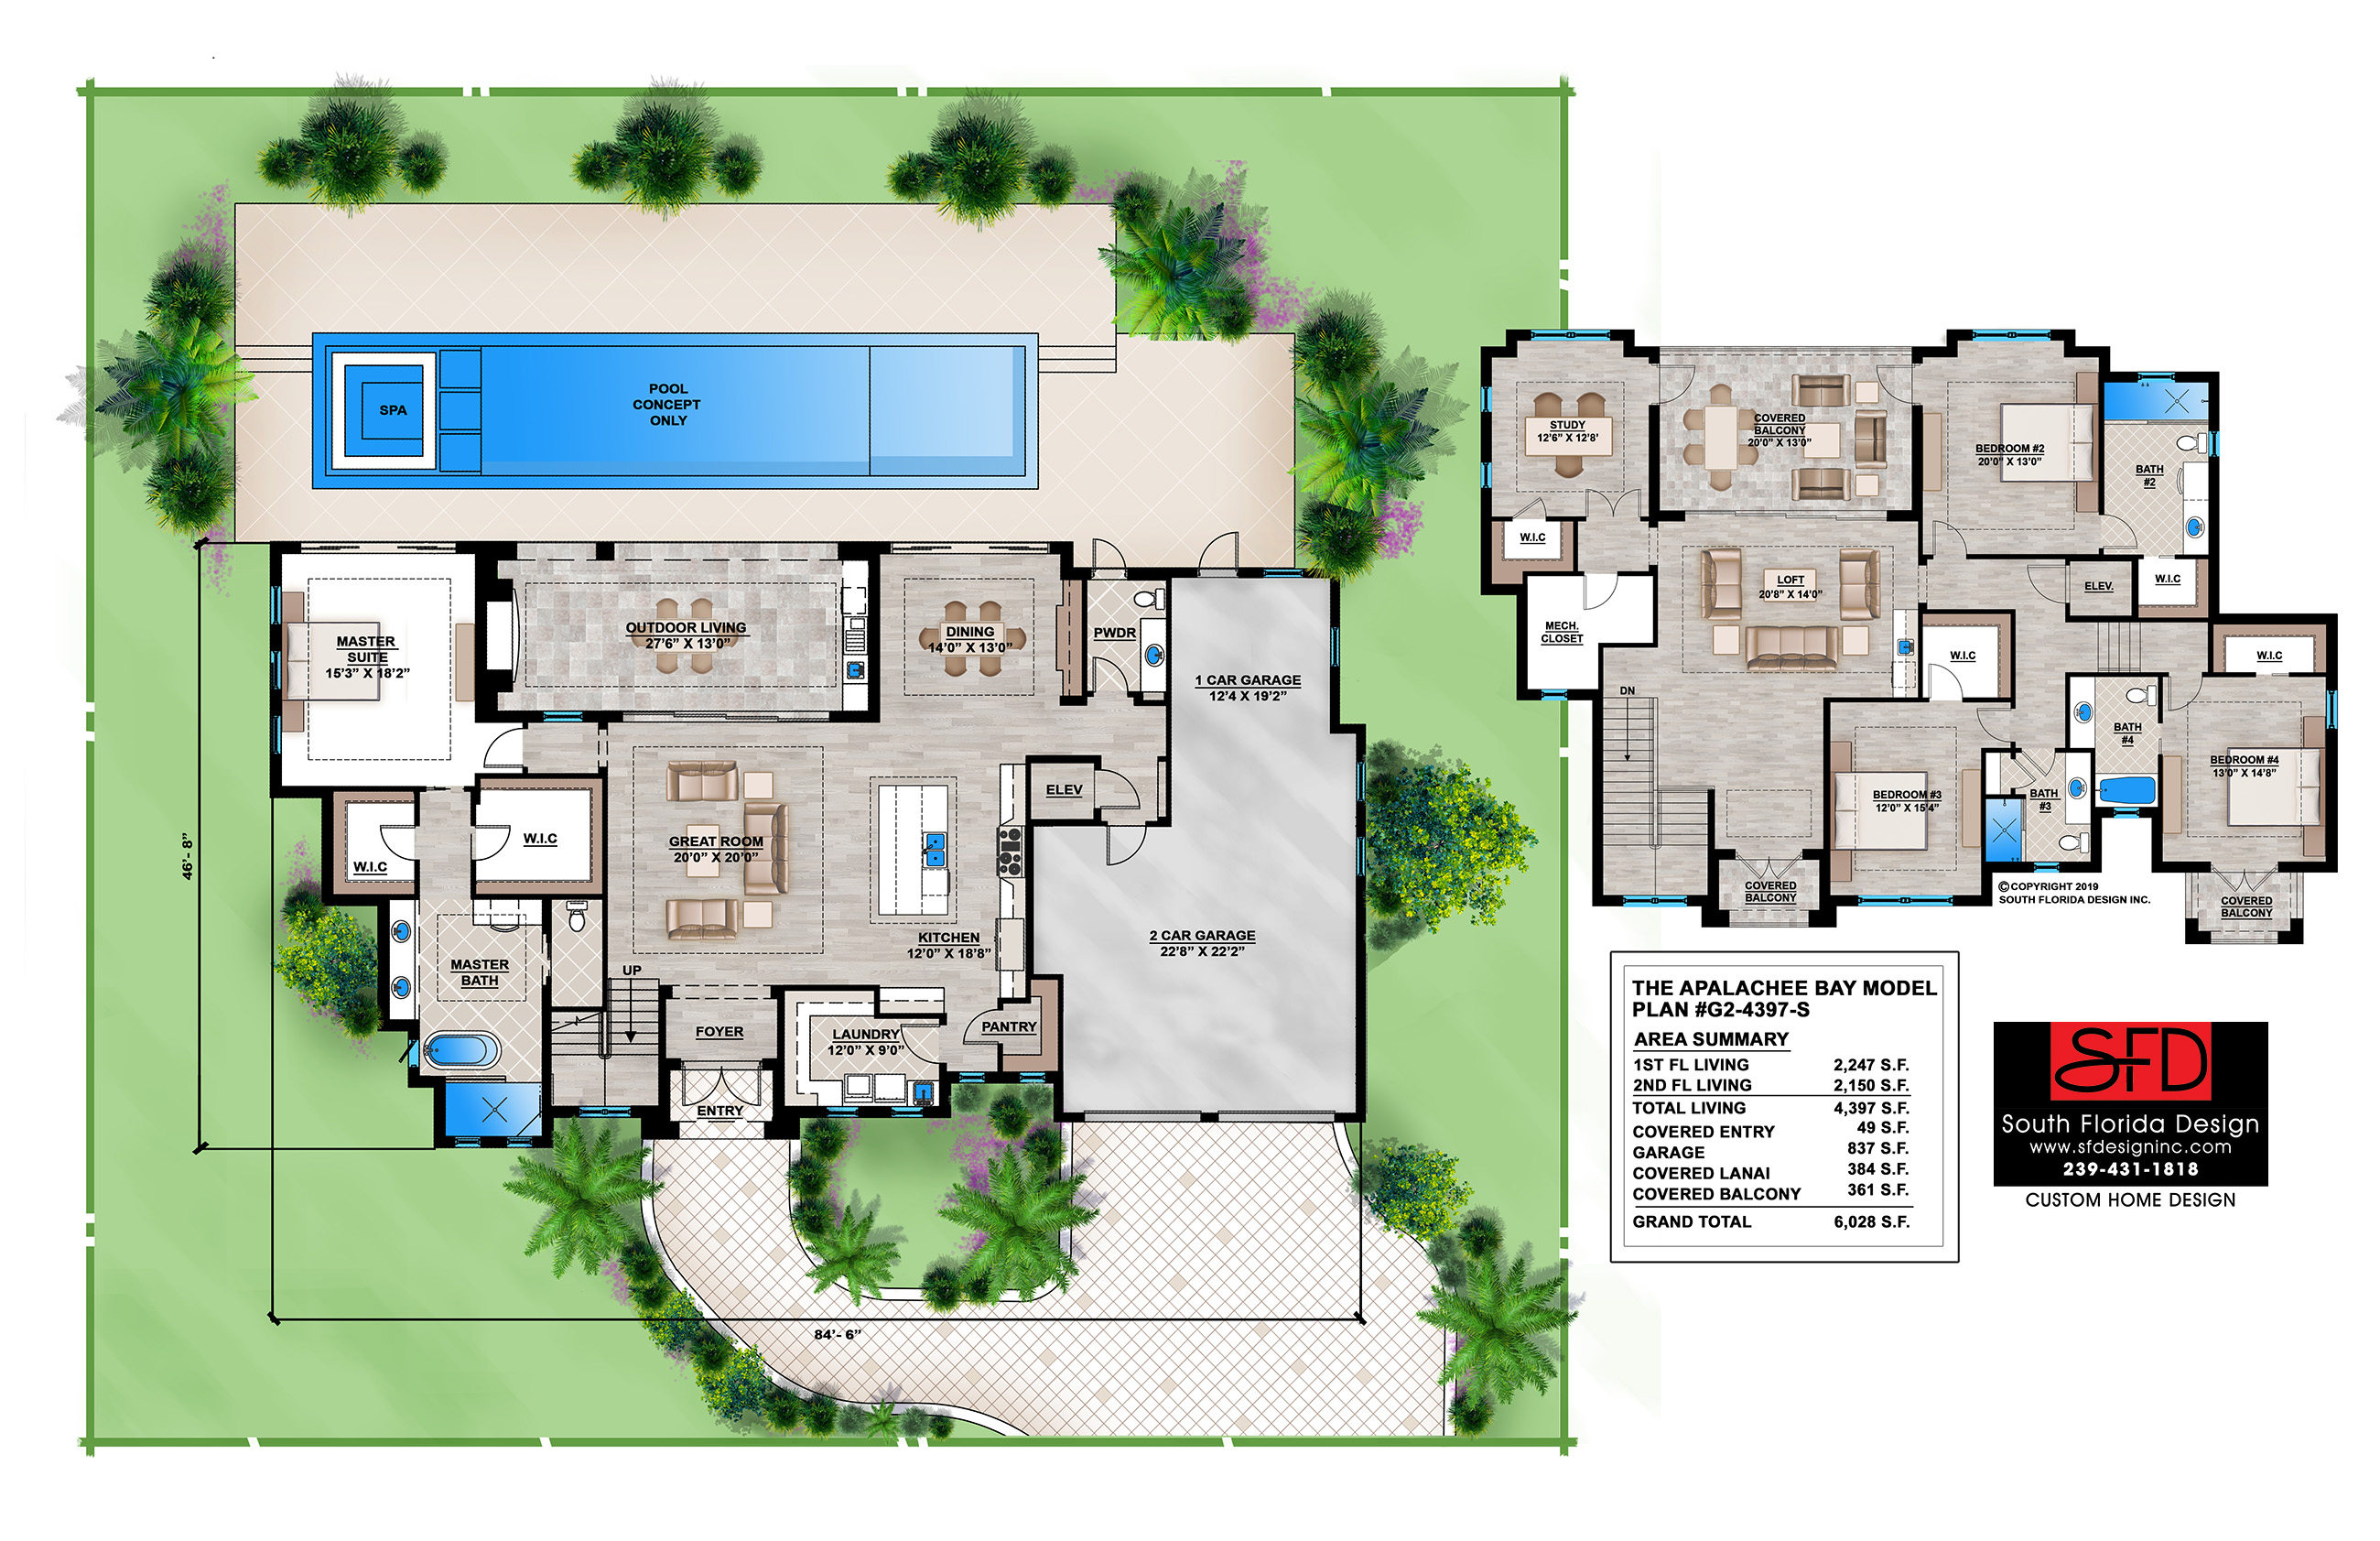 South Florida Designs 4 Bedroom Luxury 2Story House Plan